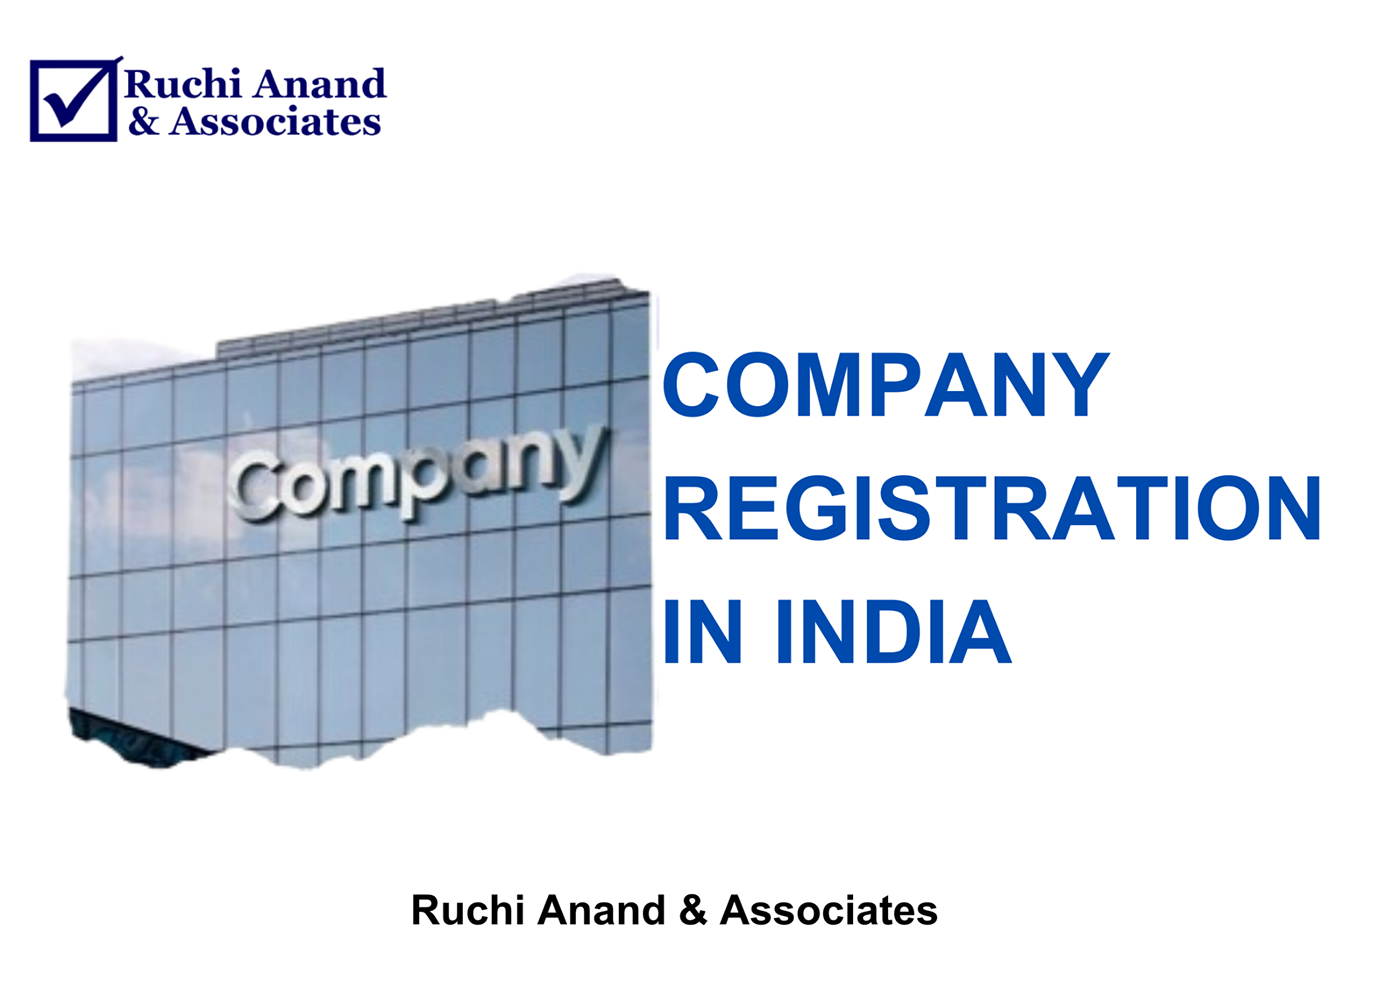 Company registration in India
Company registration in India
